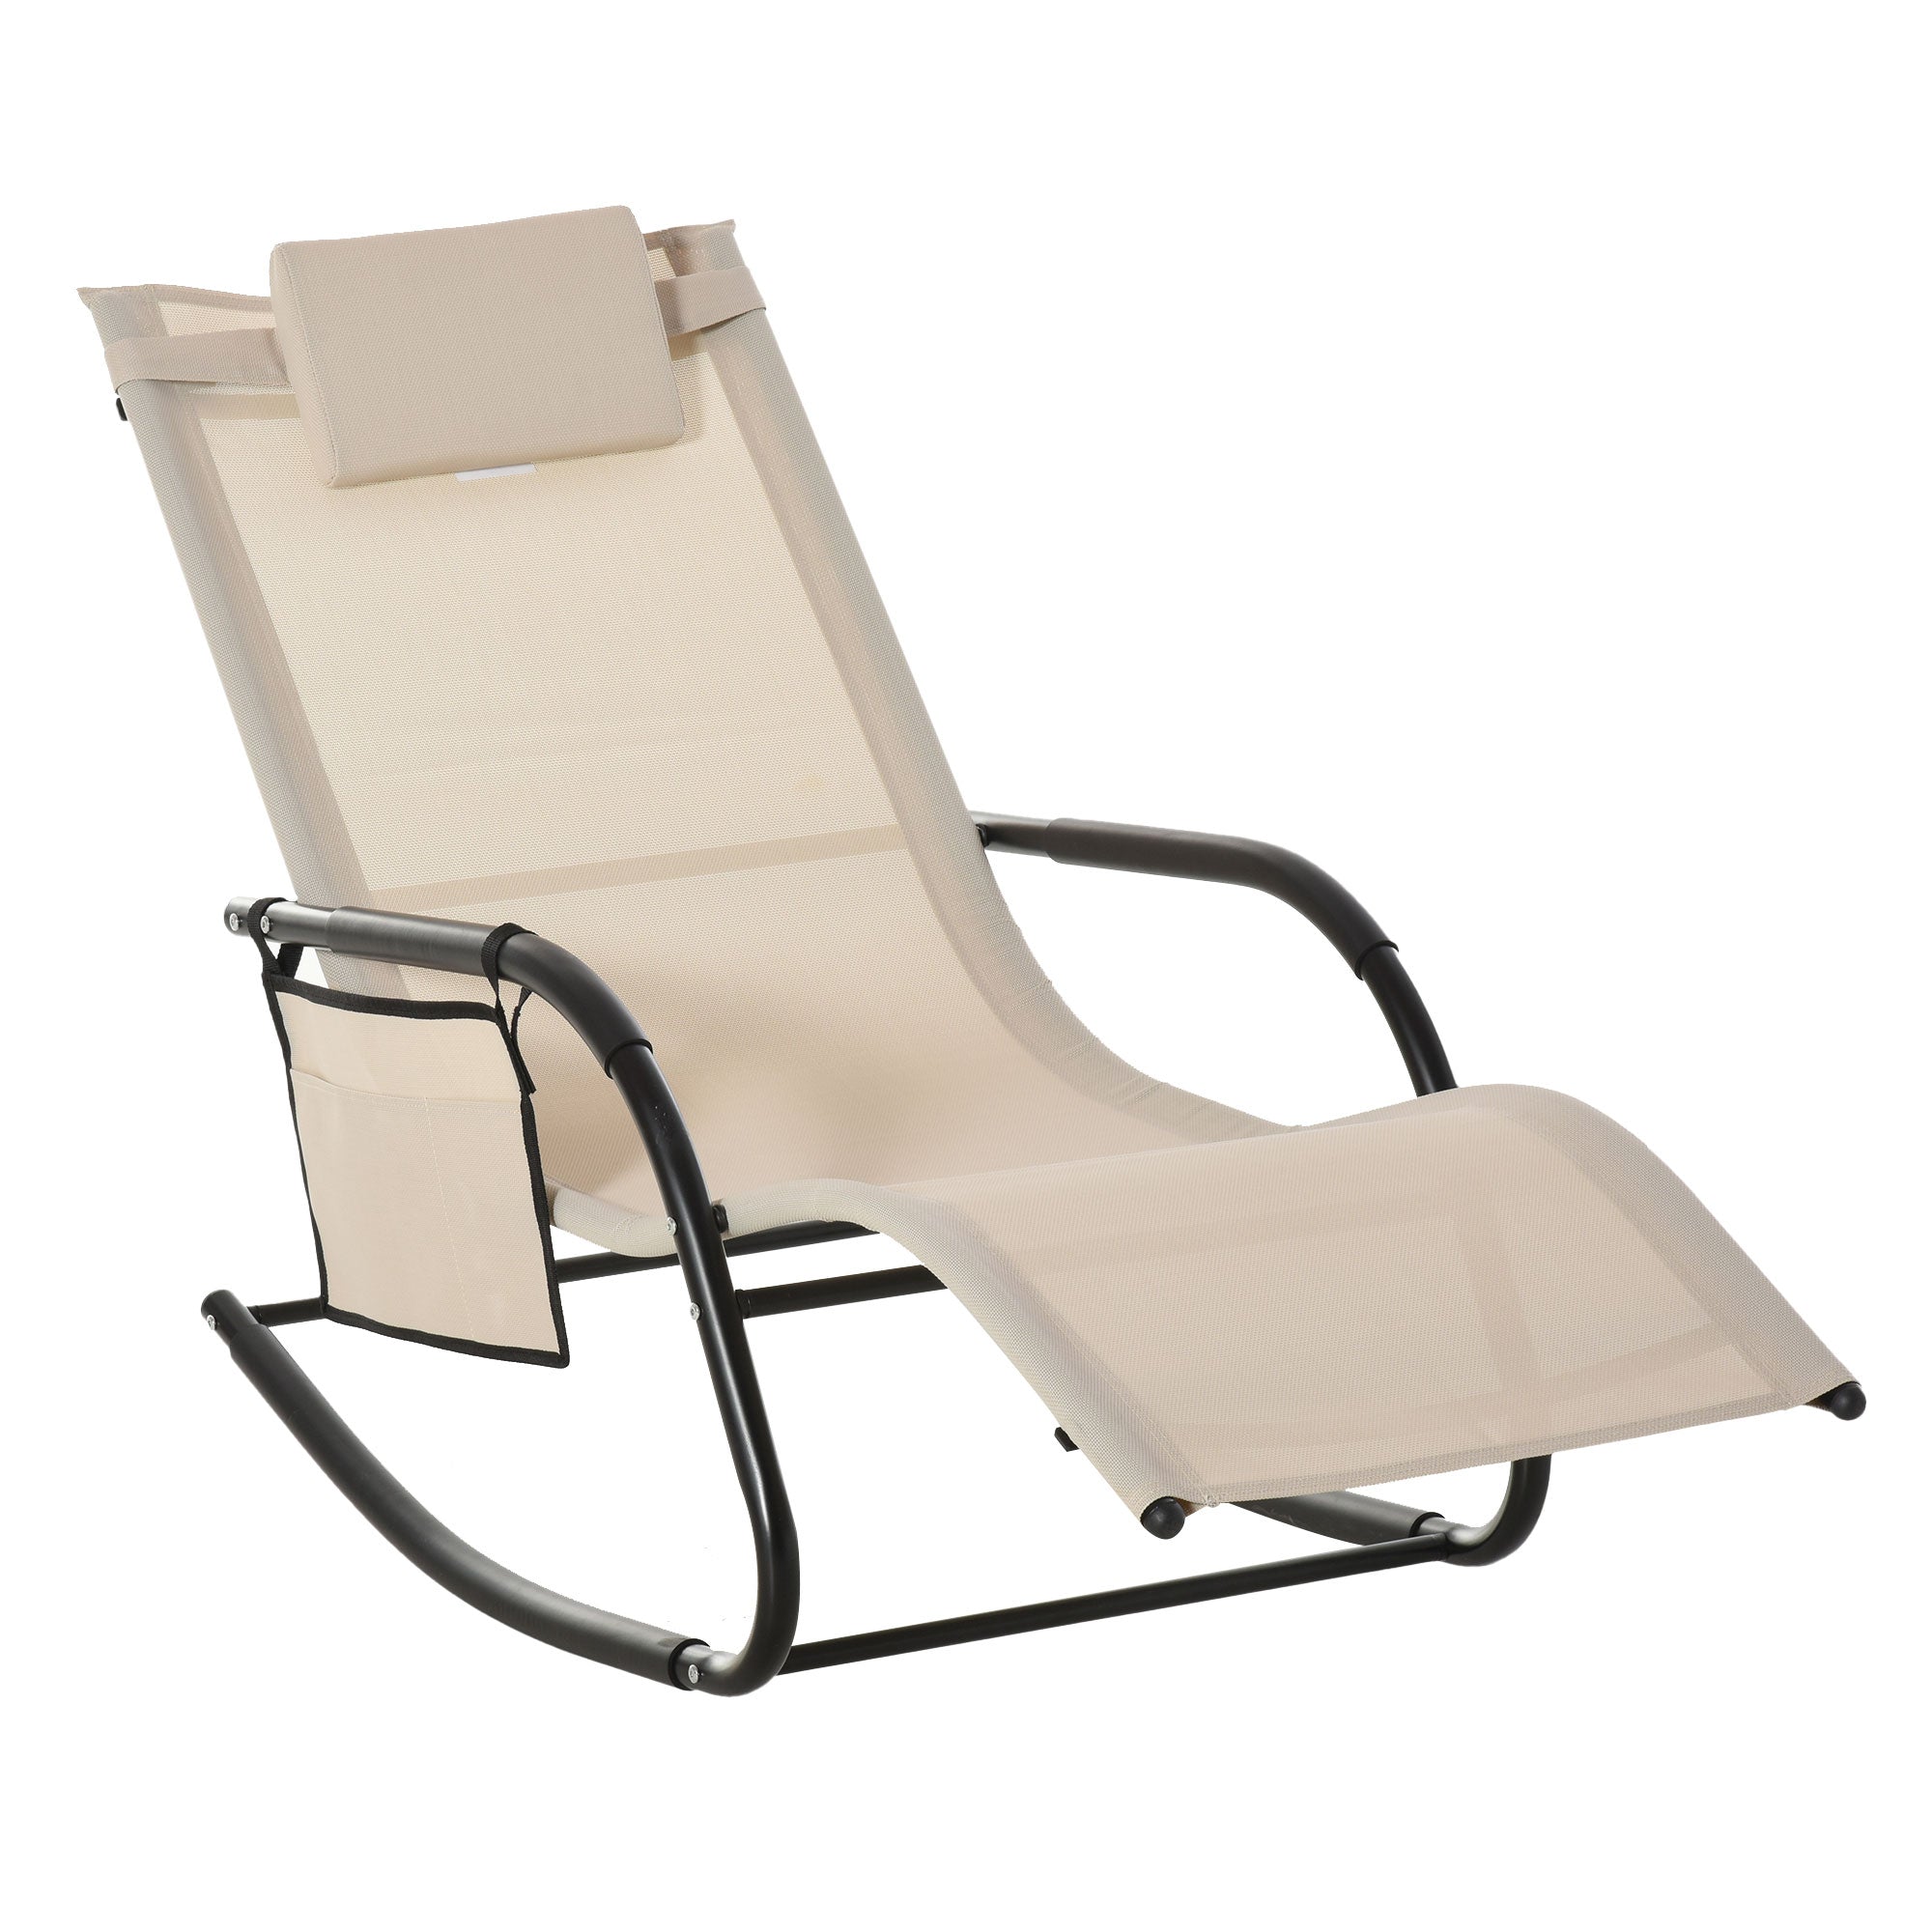 Outsunny Breathable Mesh Rocking Chair Outdoor Recliner w/ Headrest Cream White  | TJ Hughes